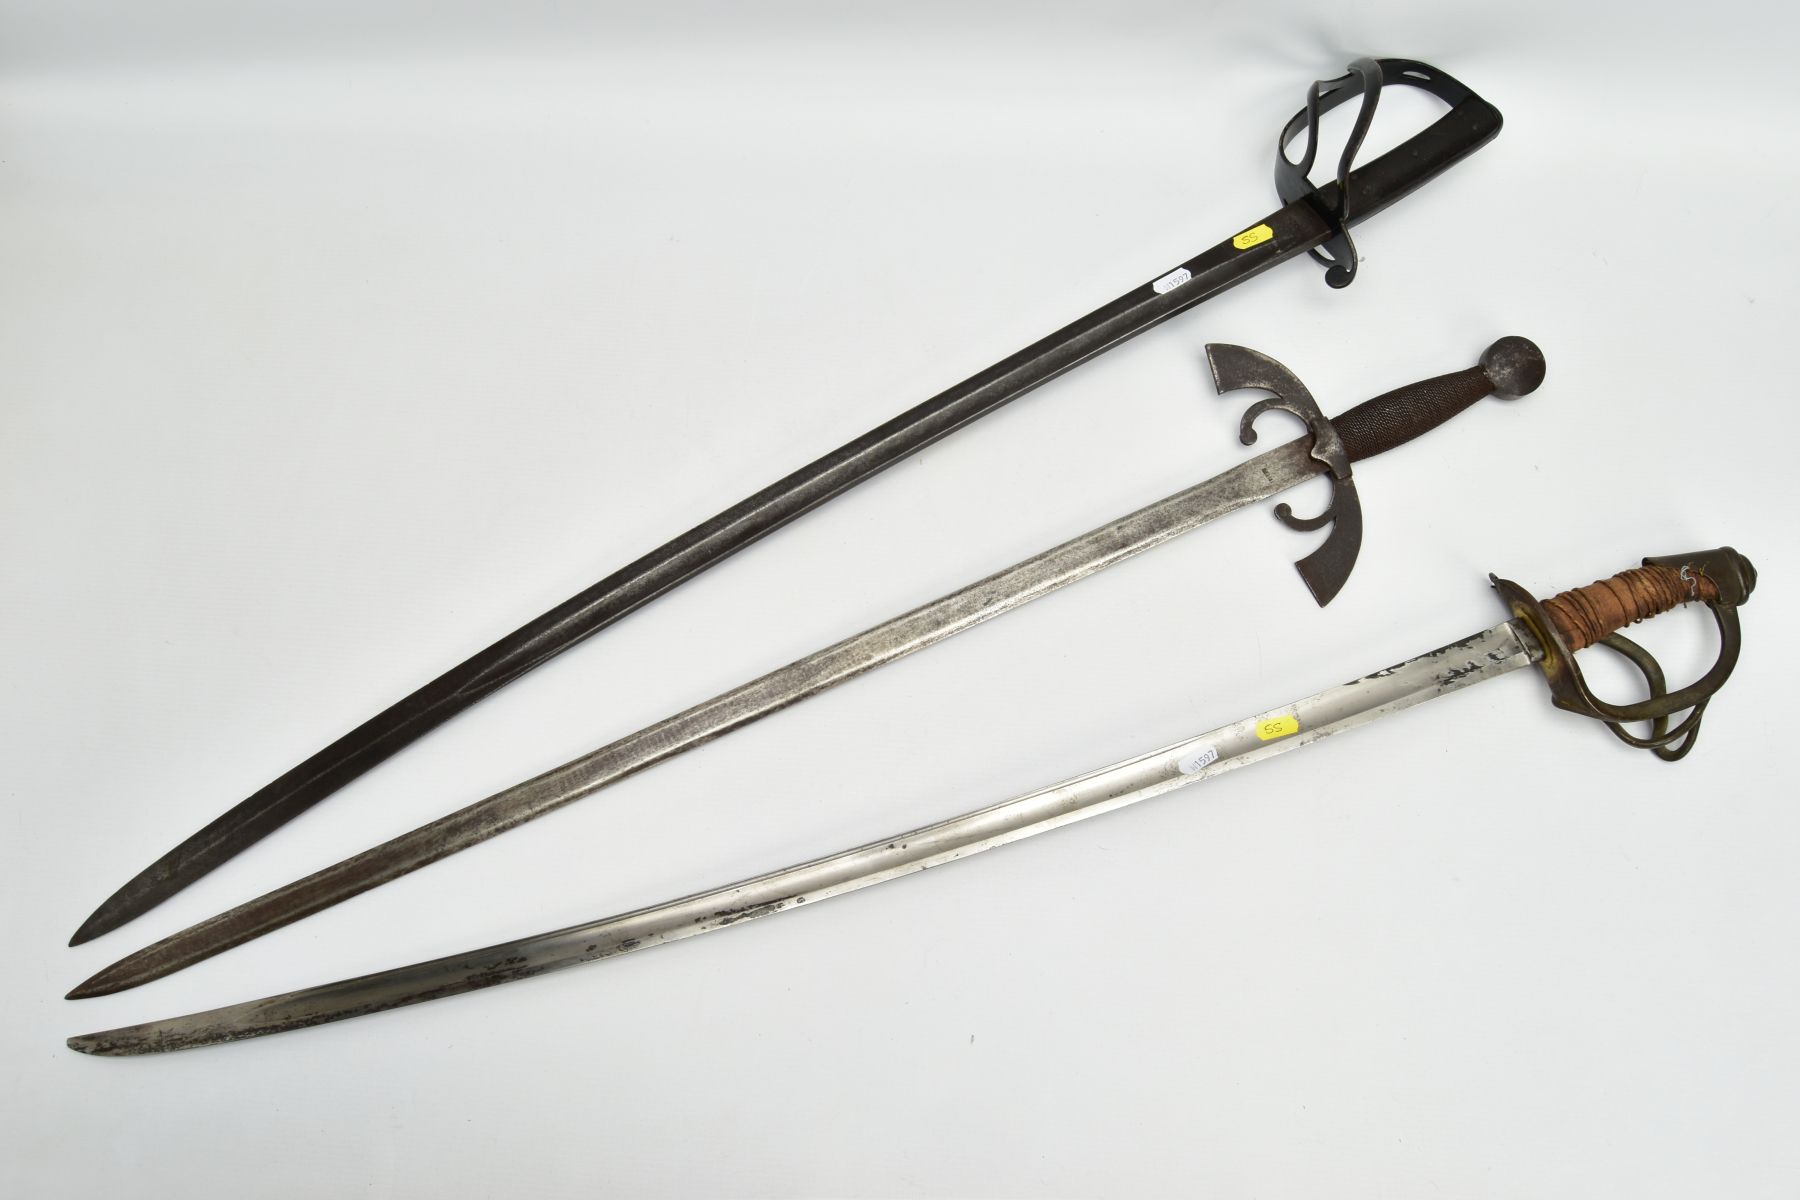 THREE MILITARY SWORDS, a Medieval style sword with ornate cross guard, blade marked Toledo, a French